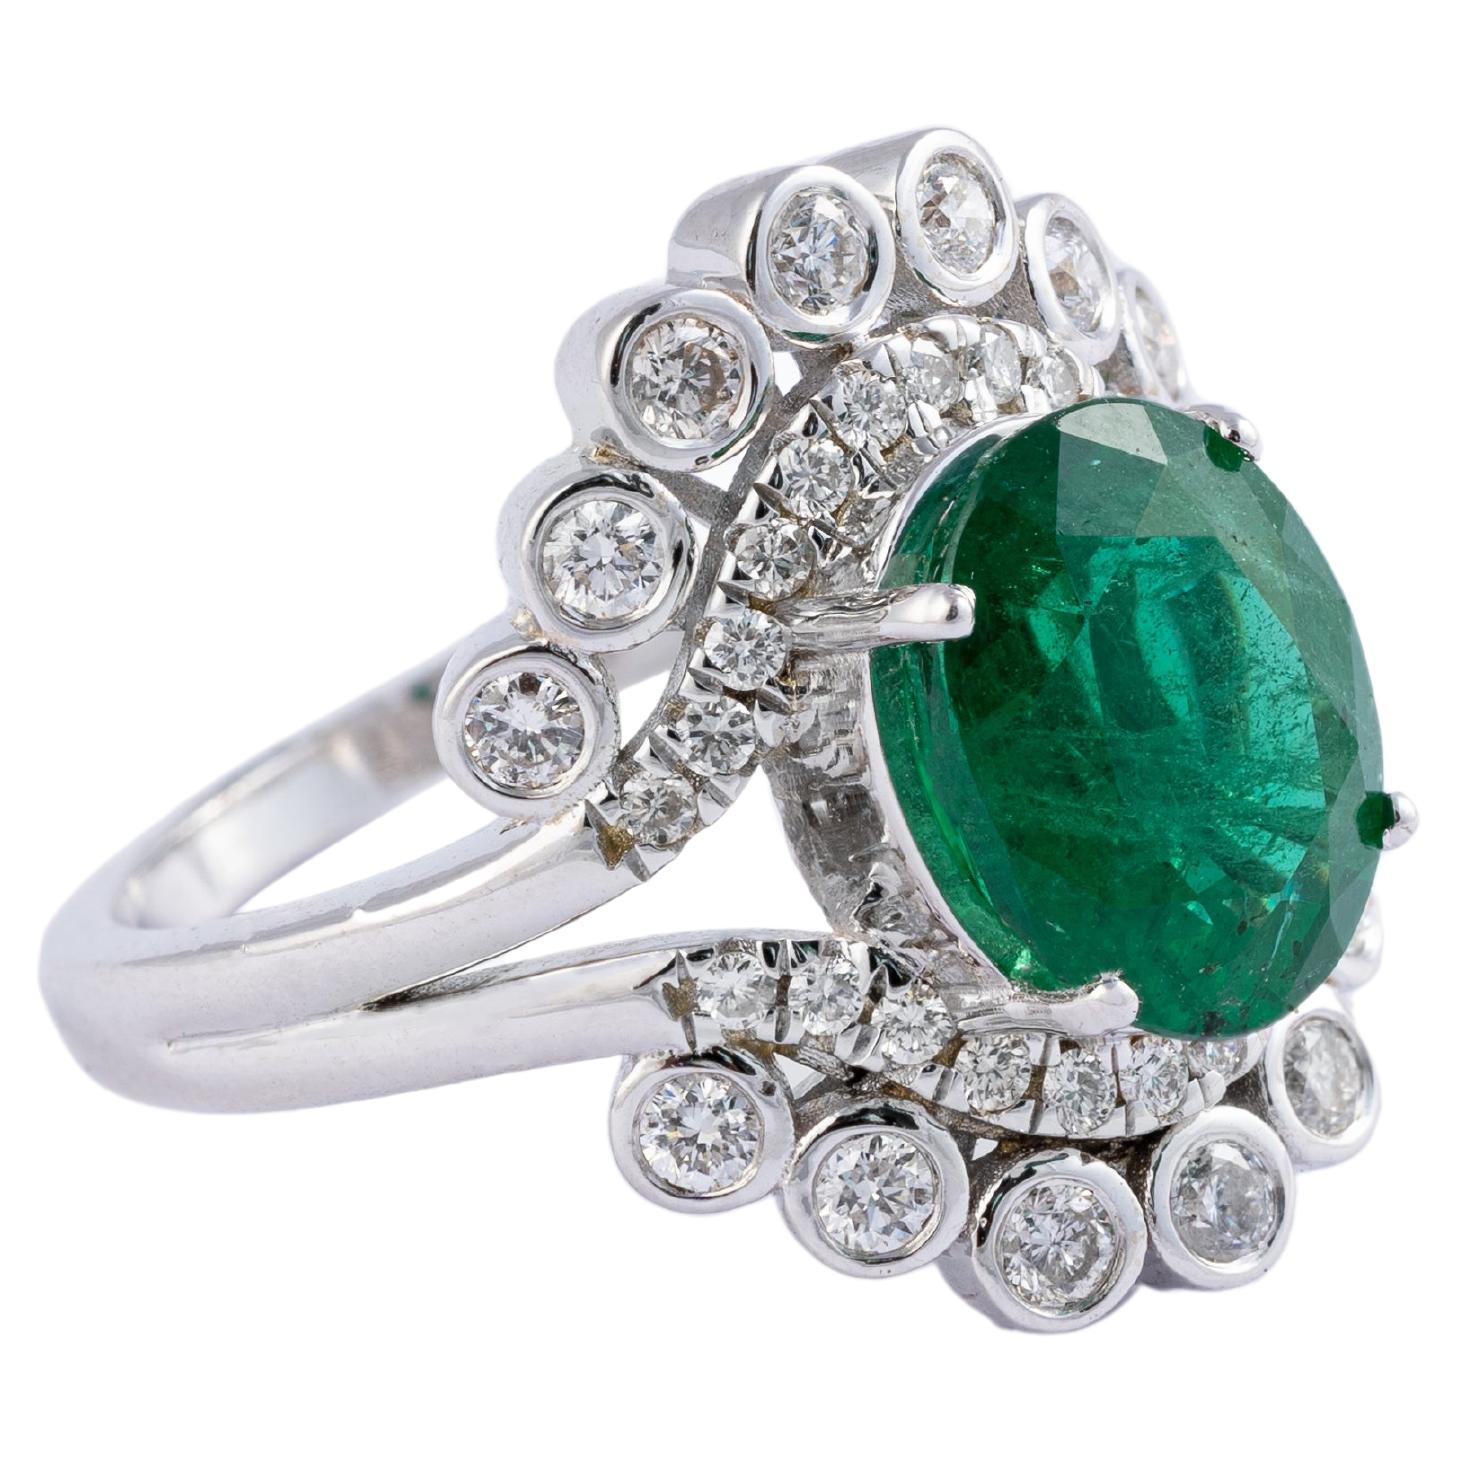 2.96 carats Natural Zambian Emerald Ring with Diamonds 0.65 carats  and 14k Gold For Sale